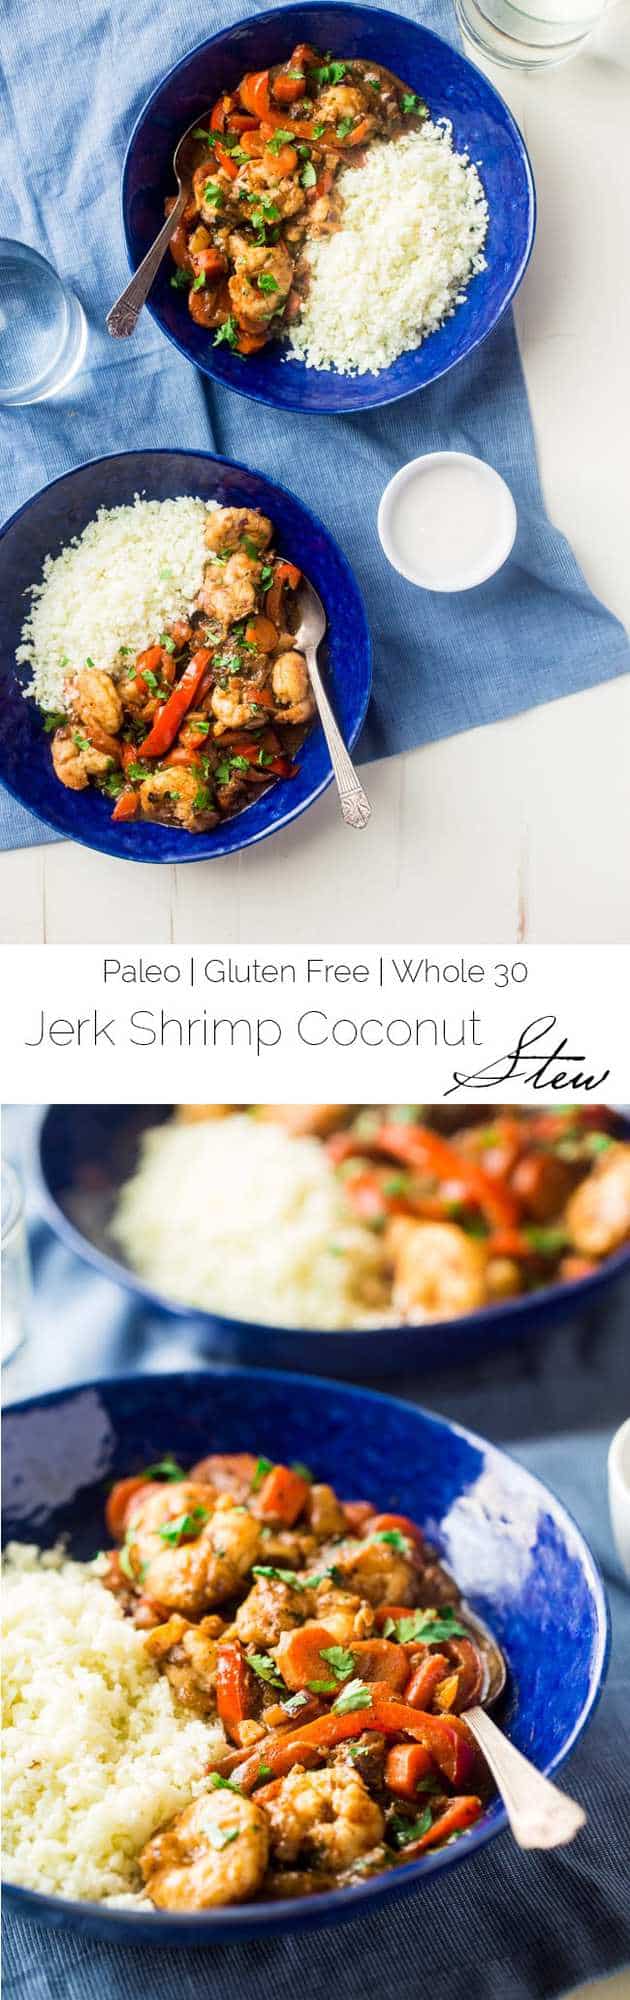 Whole 30 Jerk Shrimp Stew with Cauliflower Rice - This creamy stew uses coconut milk, pineapples and bold flavors for a healthy, 30 minute weeknight meal that is paleo friendly and whole 30 compliant! | Foodfaithfitness.com